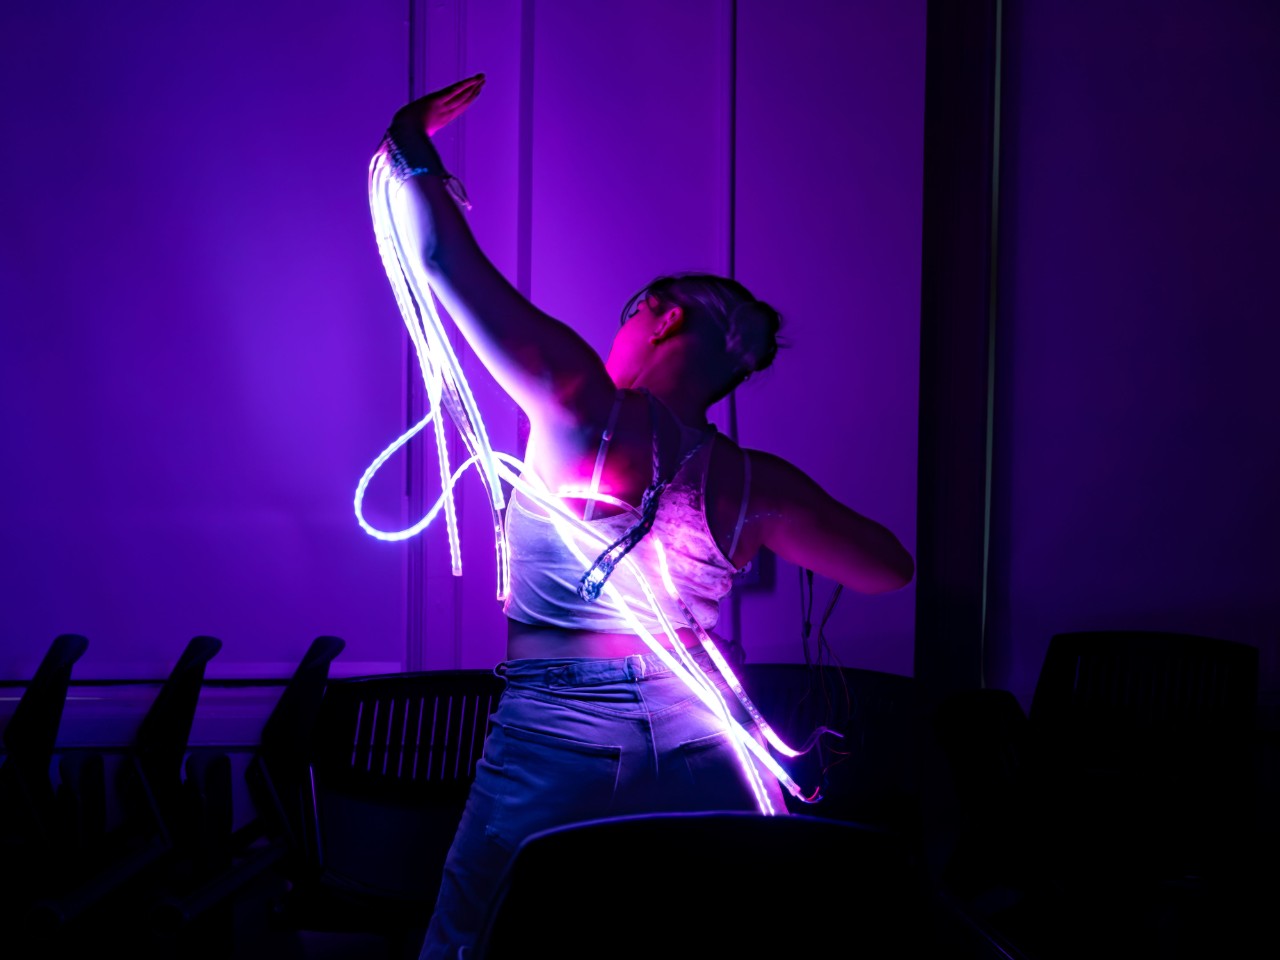 A person performing a dance or movement with illuminated LED light strips wrapped around their body in a dark room, creating a vibrant display of purple and blue light.